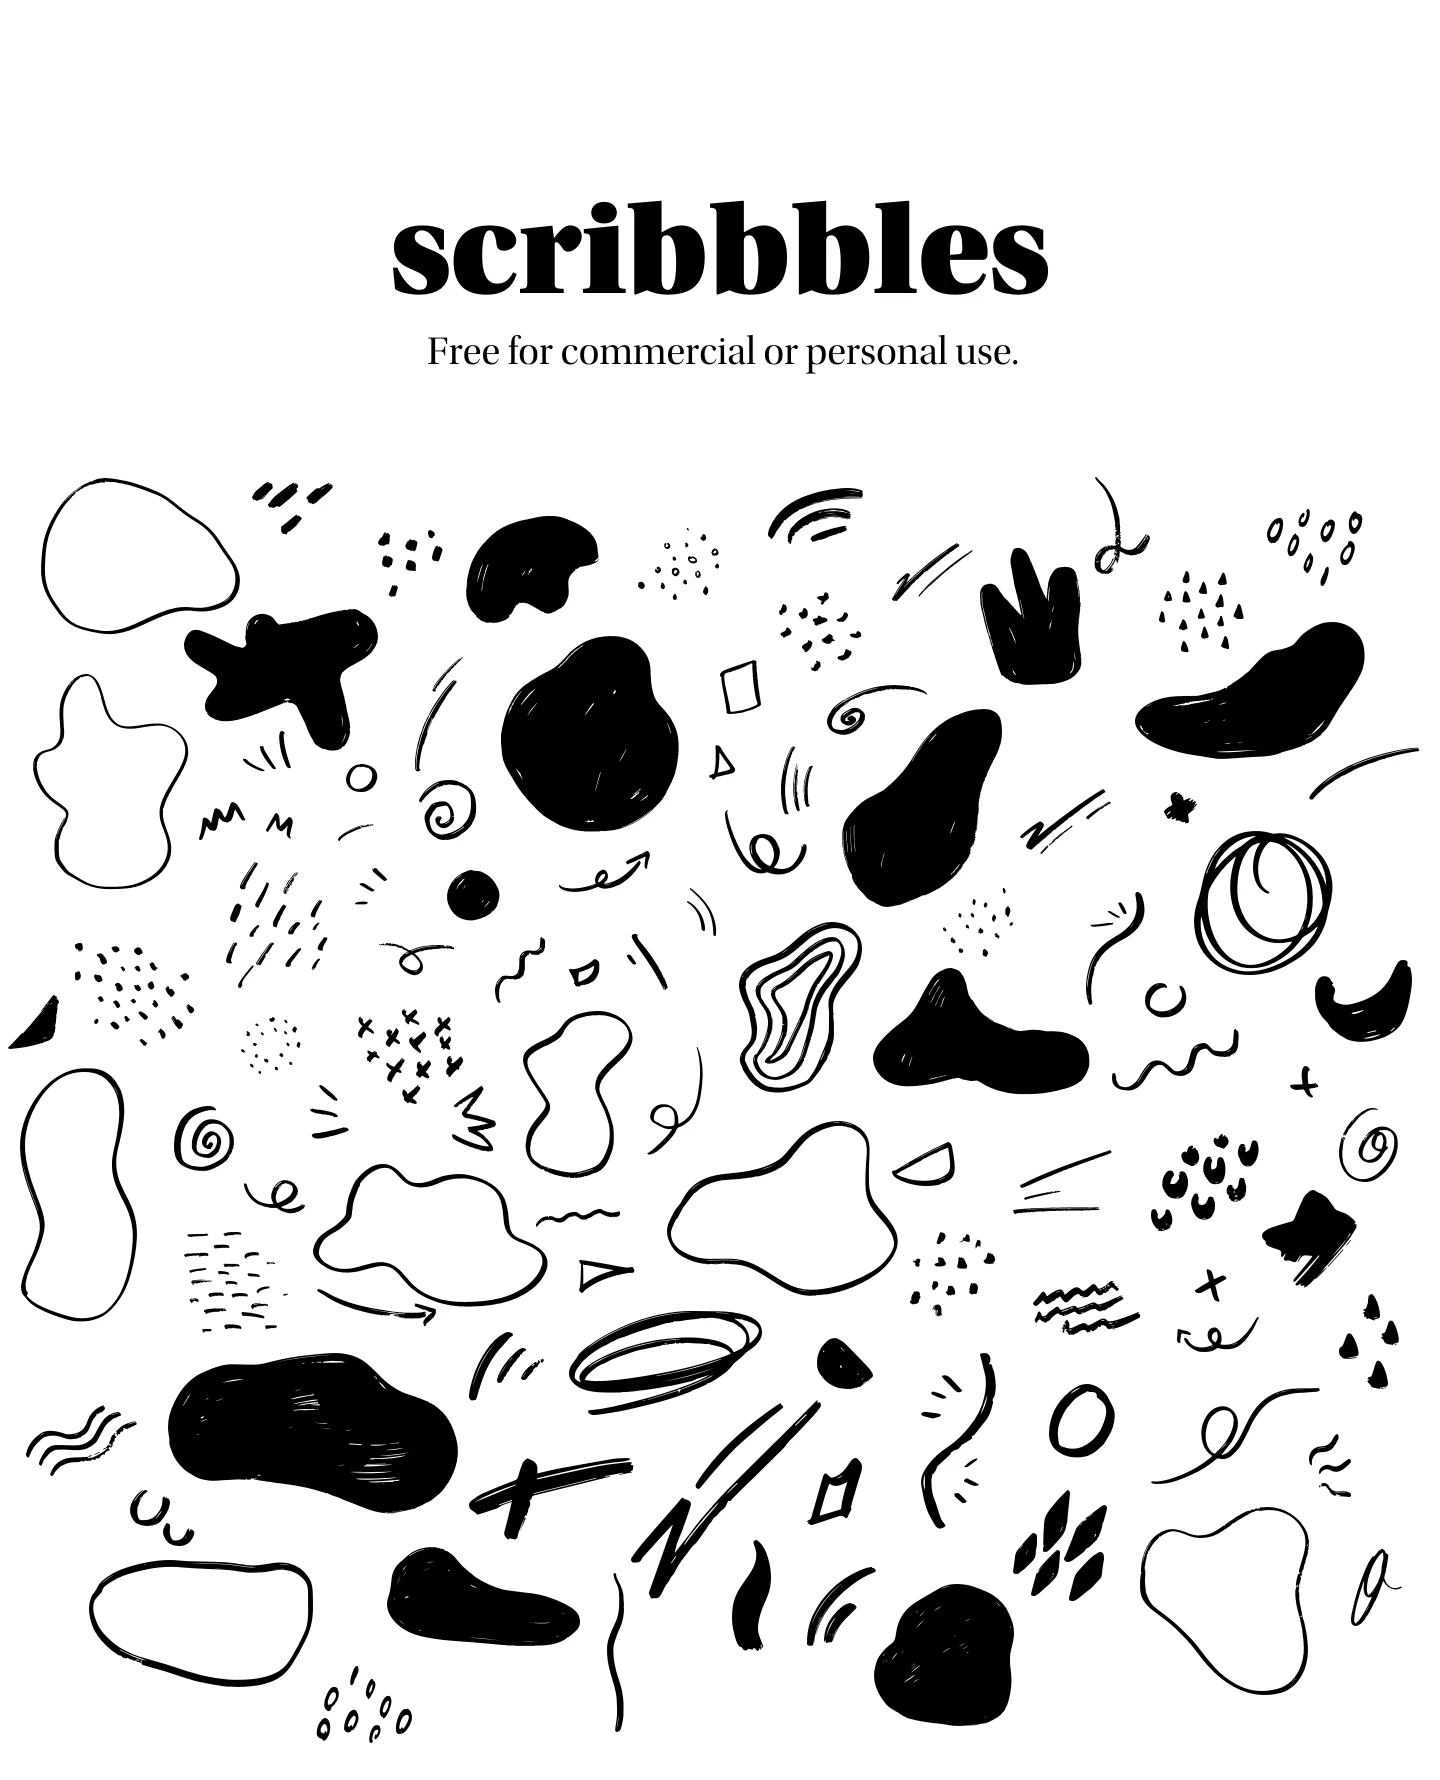 Scribbbles Illustrations - 100+ vectorized scribbbles to spice up your design projects